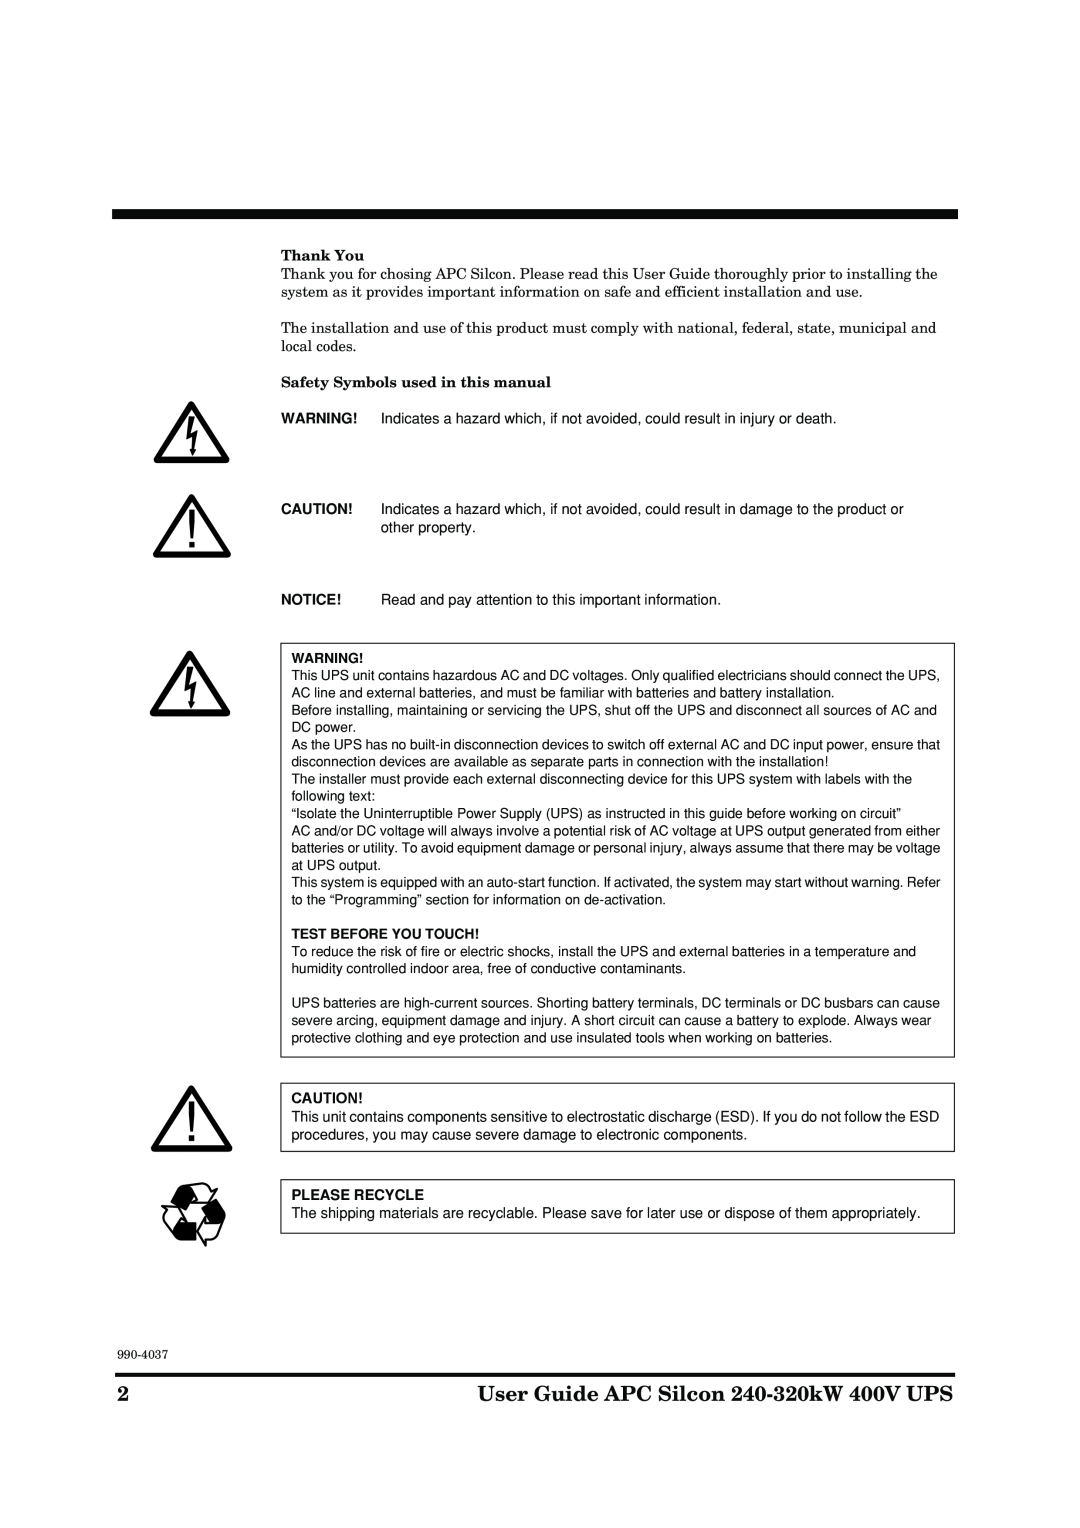 American Power Conversion User Guide APC Silcon 240-320kW 400V UPS, Thank You, Safety Symbols used in this manual 